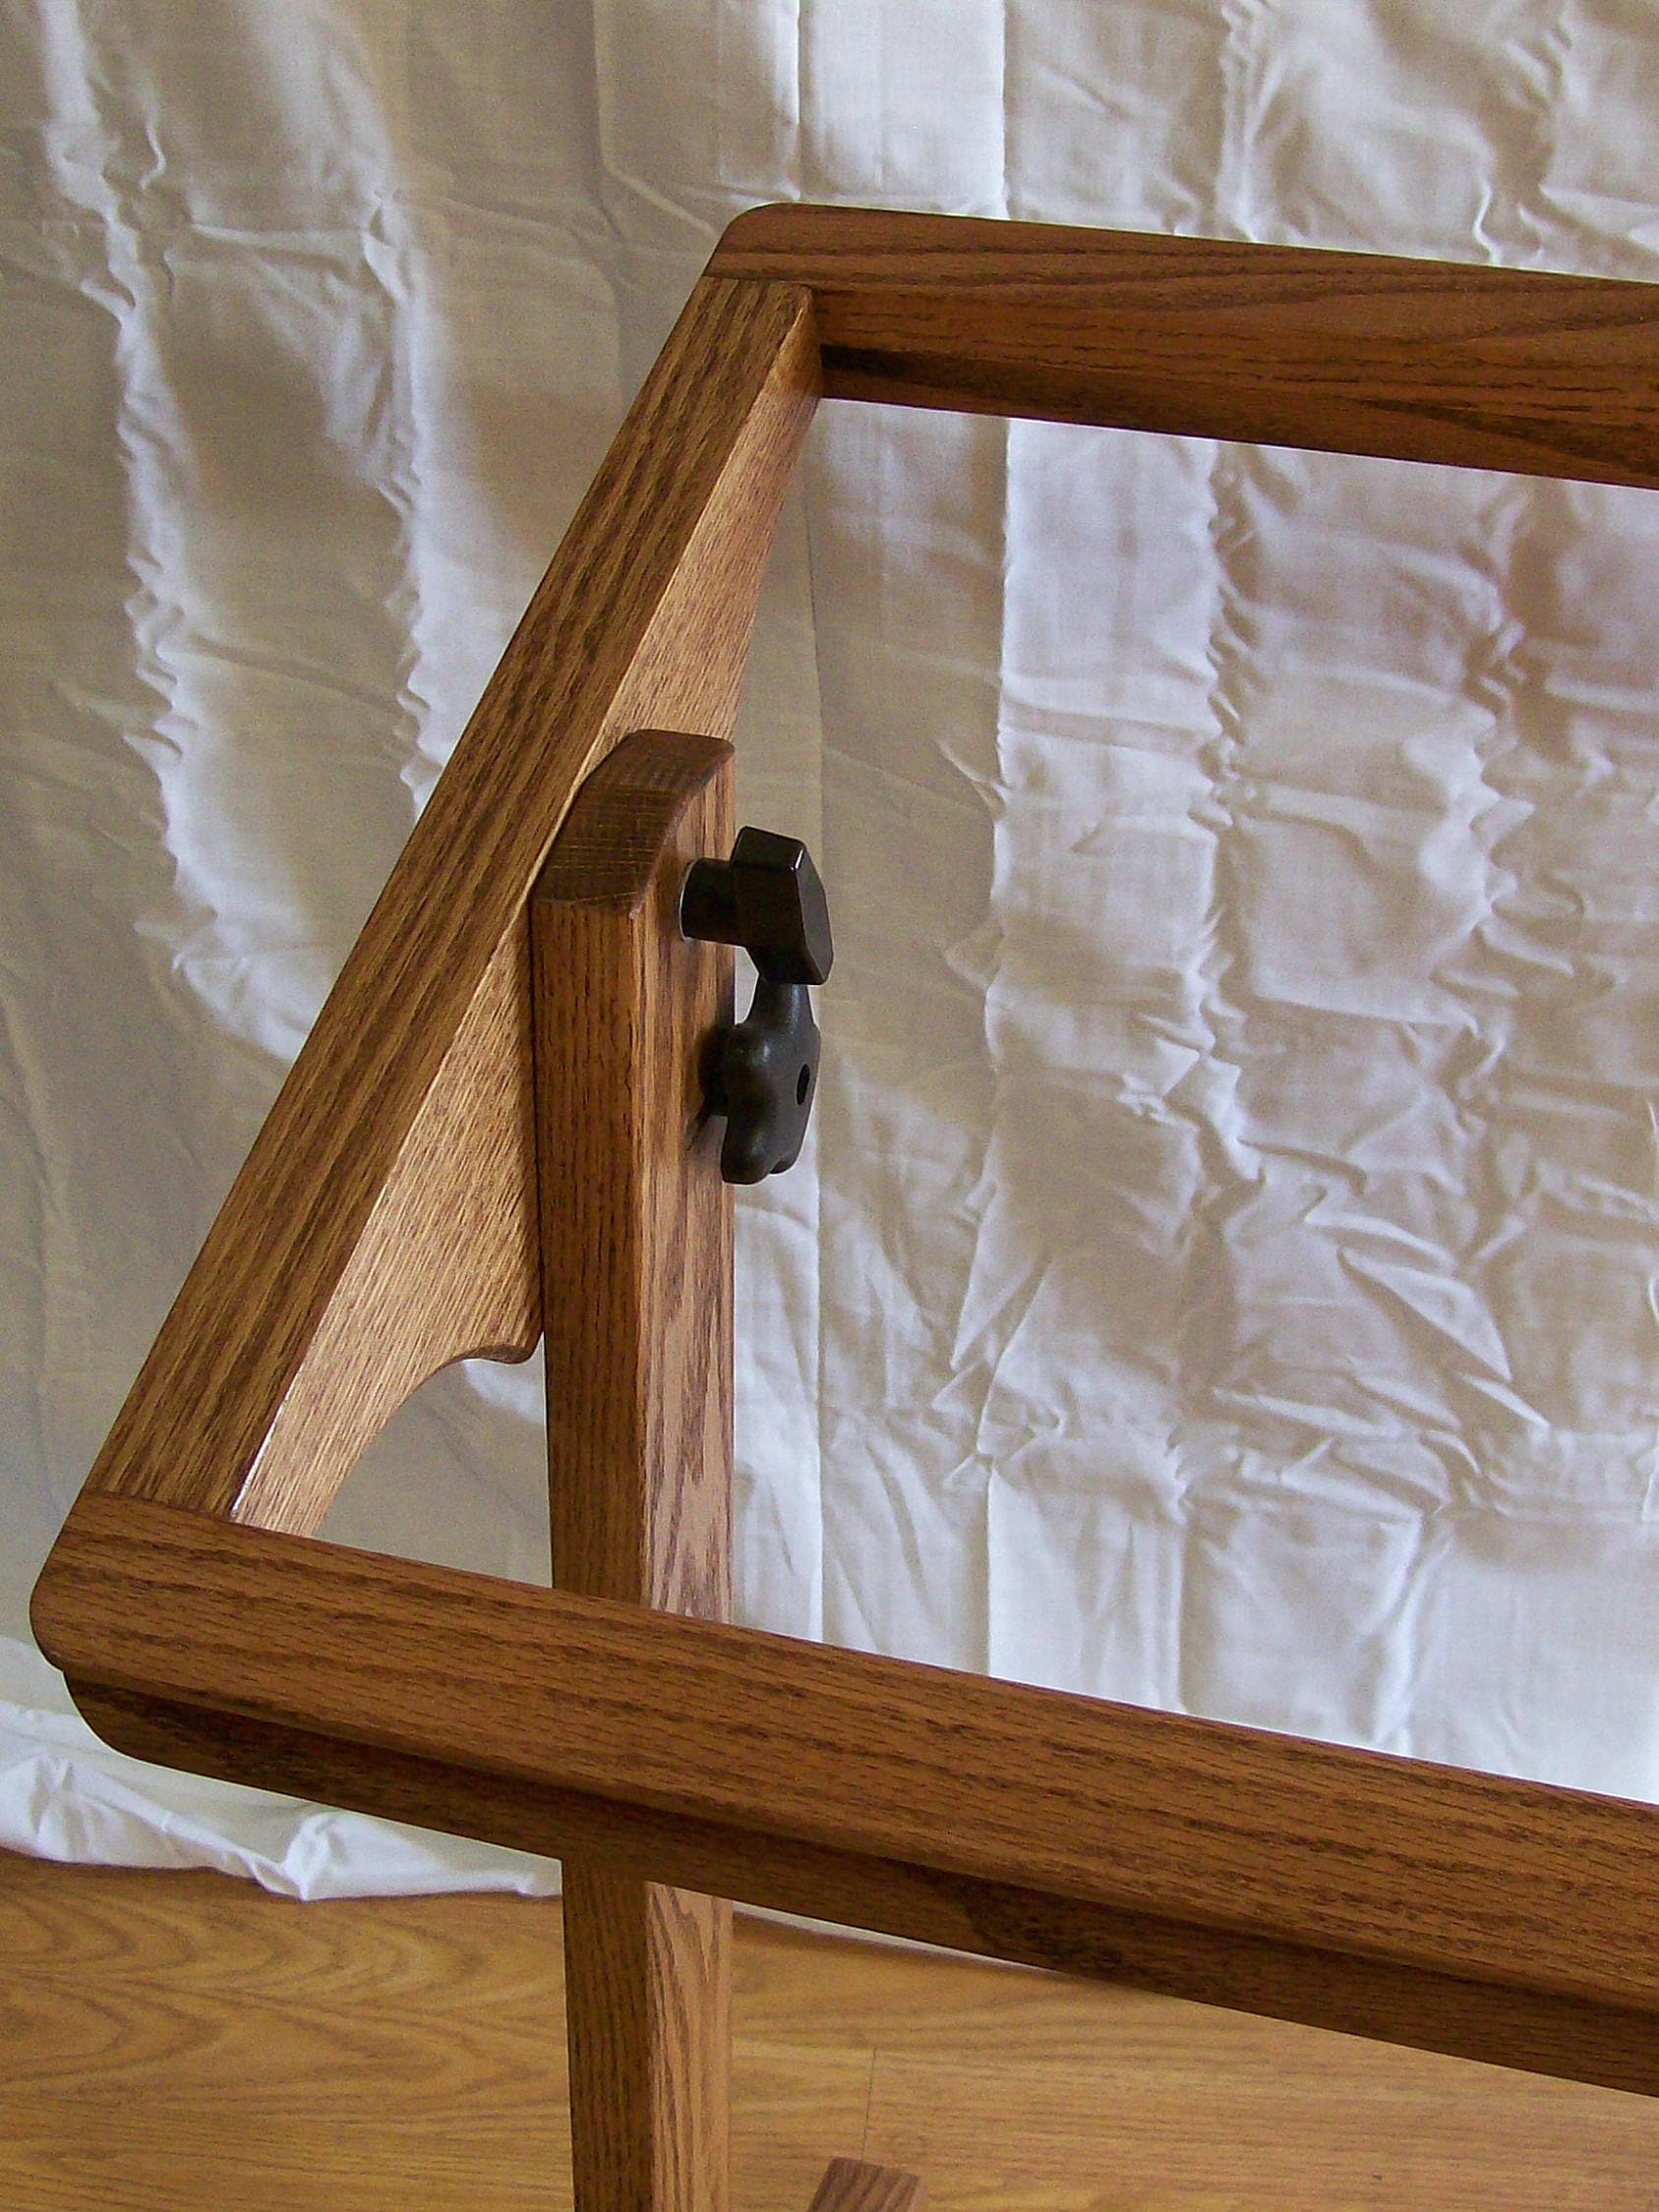 Quilt Frame Love - 4--rail-system - Oak - Amish hand-quilting with